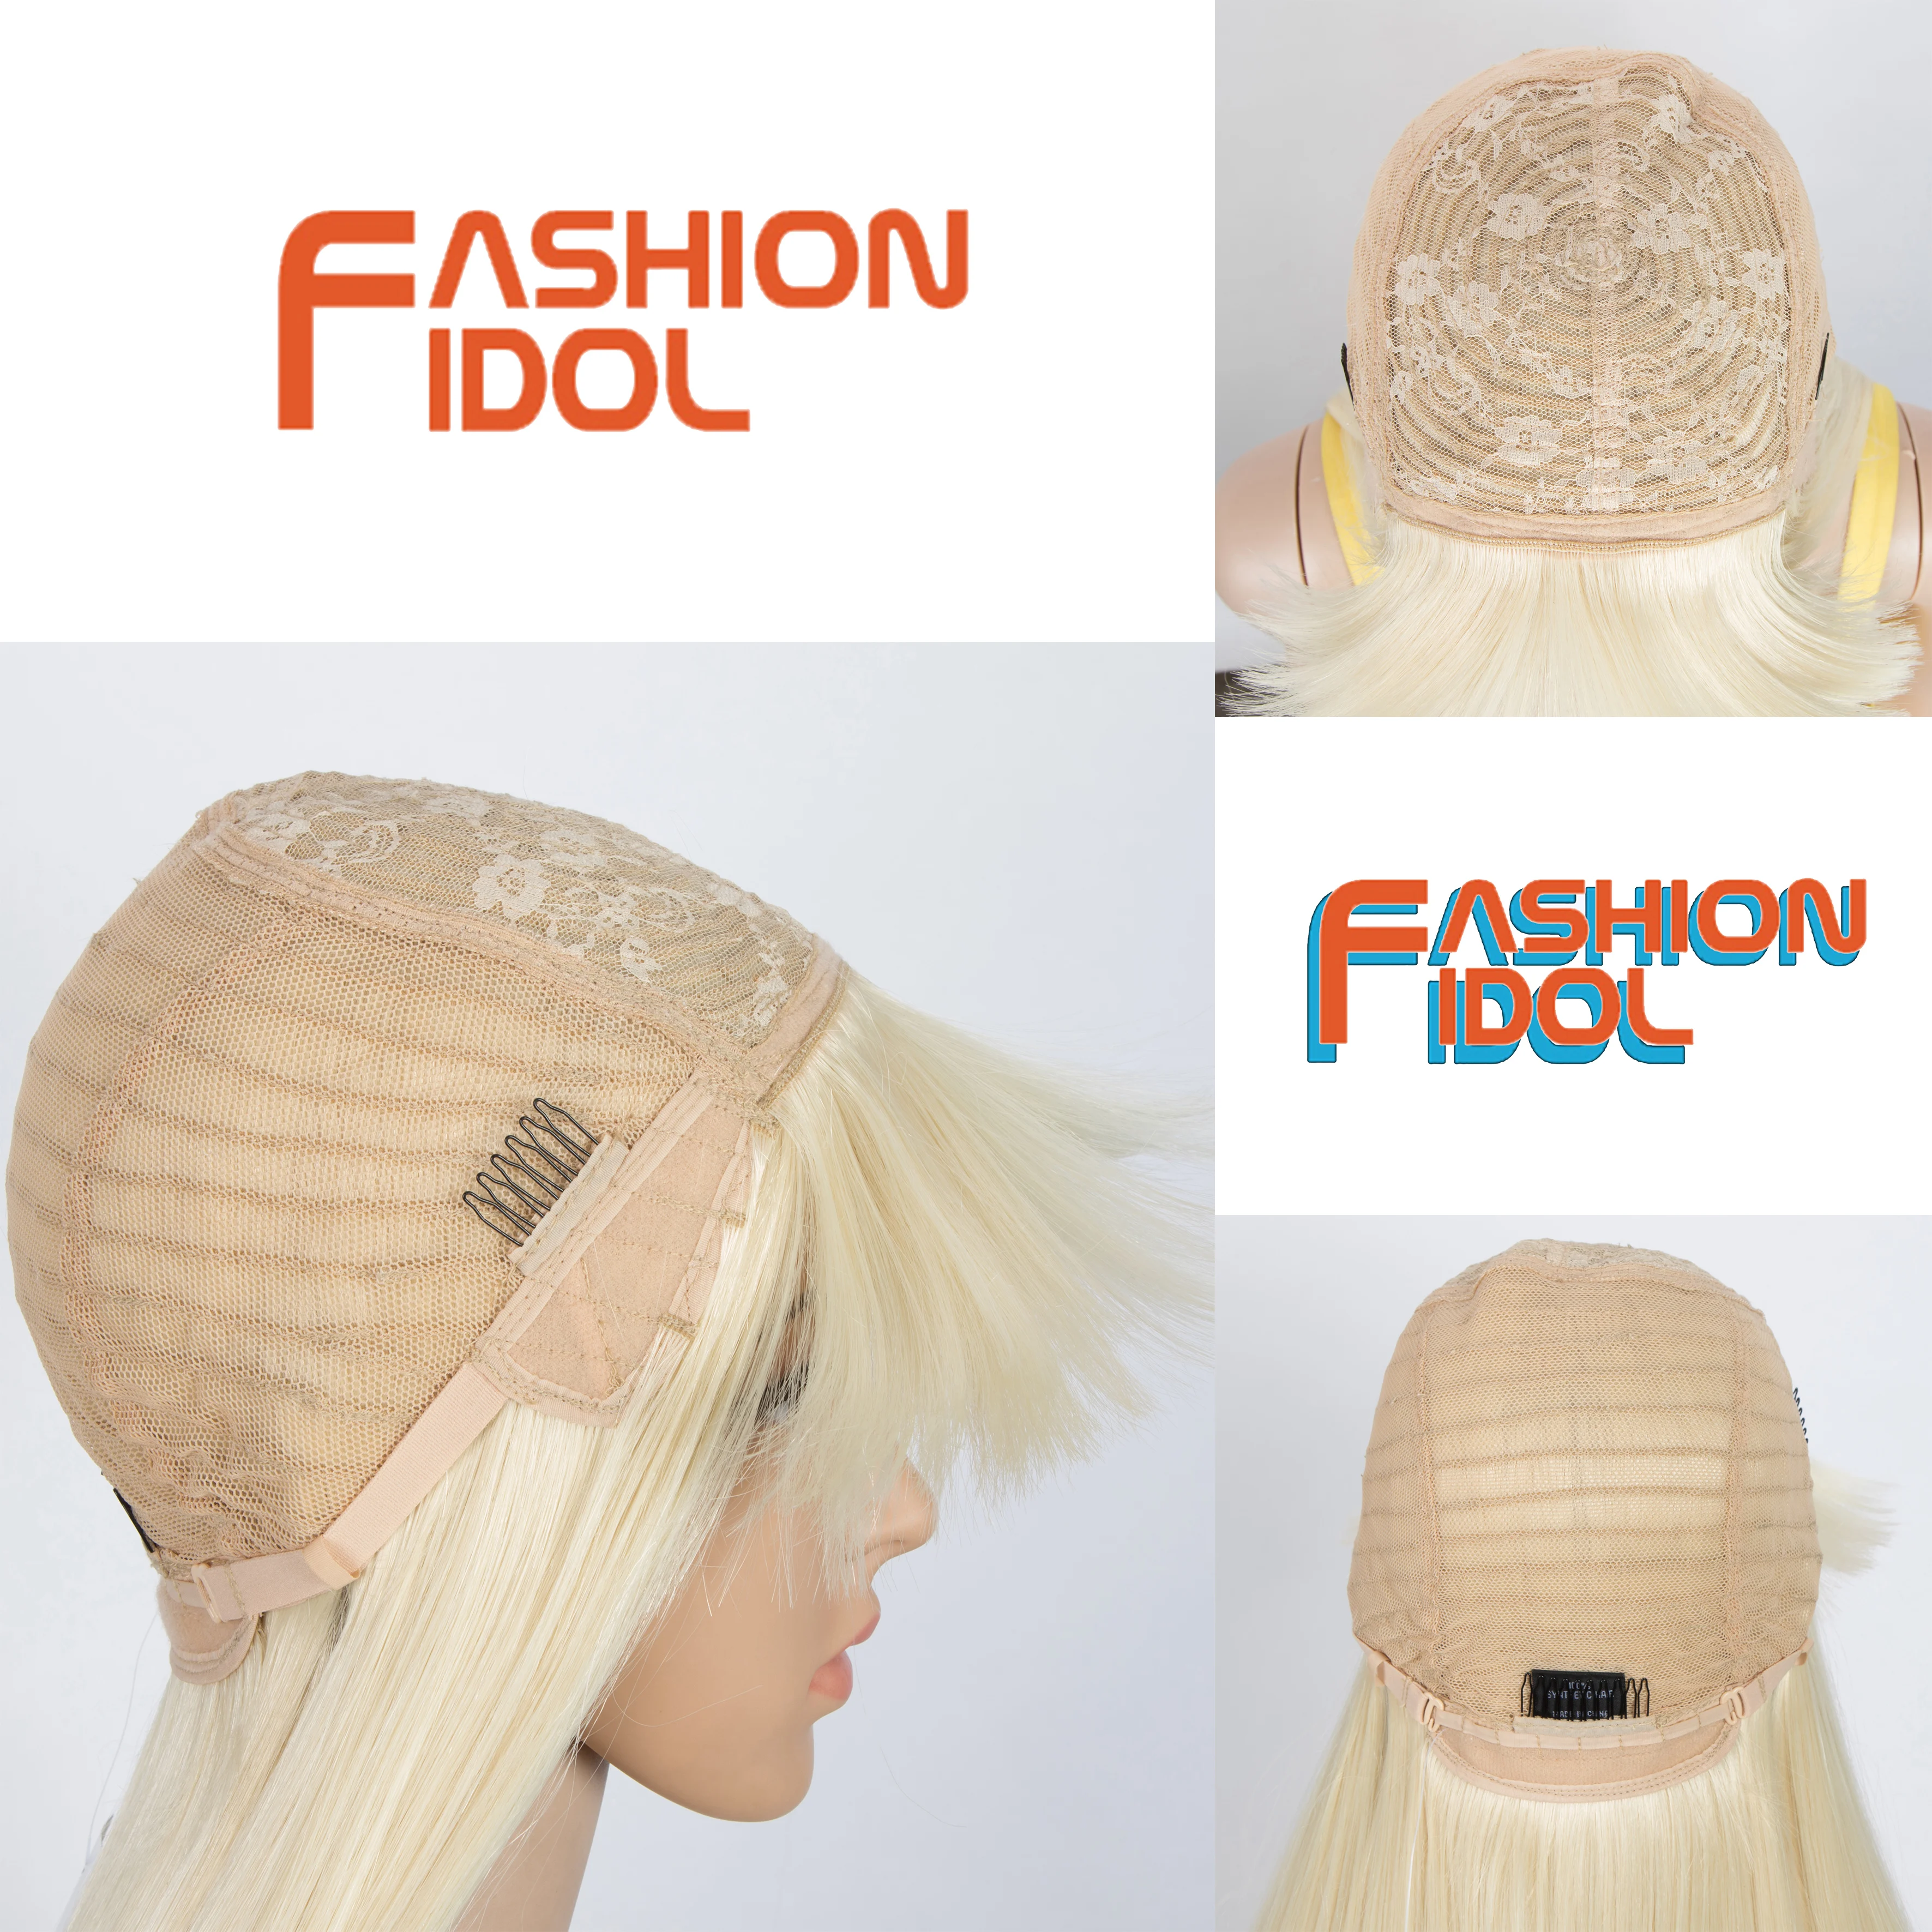 

Blonde Bob Wigs With Bangs 613 Cosplays Long Straight Lolita Hair 36 Inches Synthetic Anime Wig For White Women FASHION IDOL